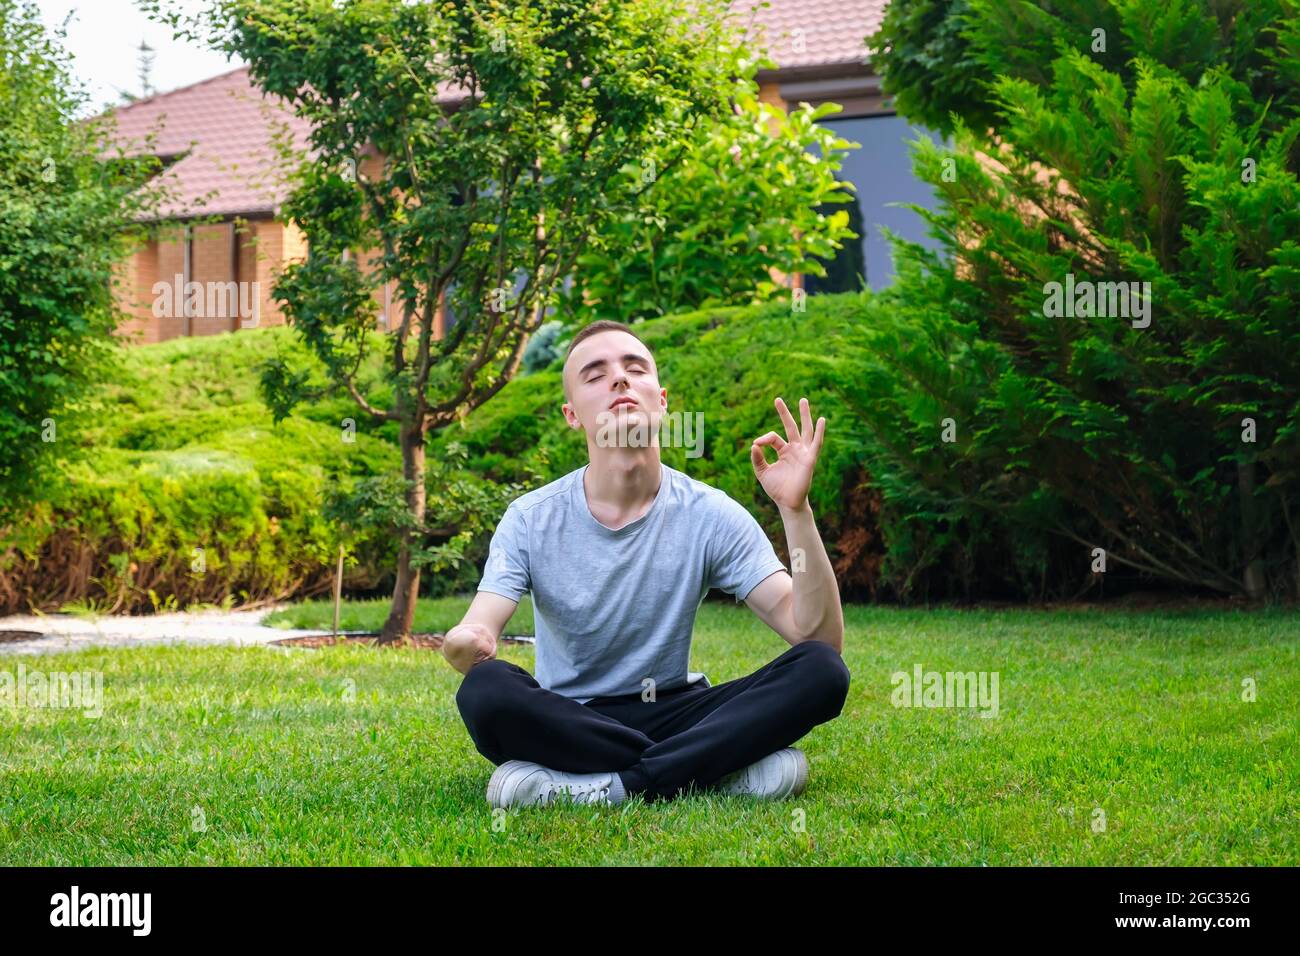 Man with amputated arm exercising with rubber elastic band outdoors Stock Photo